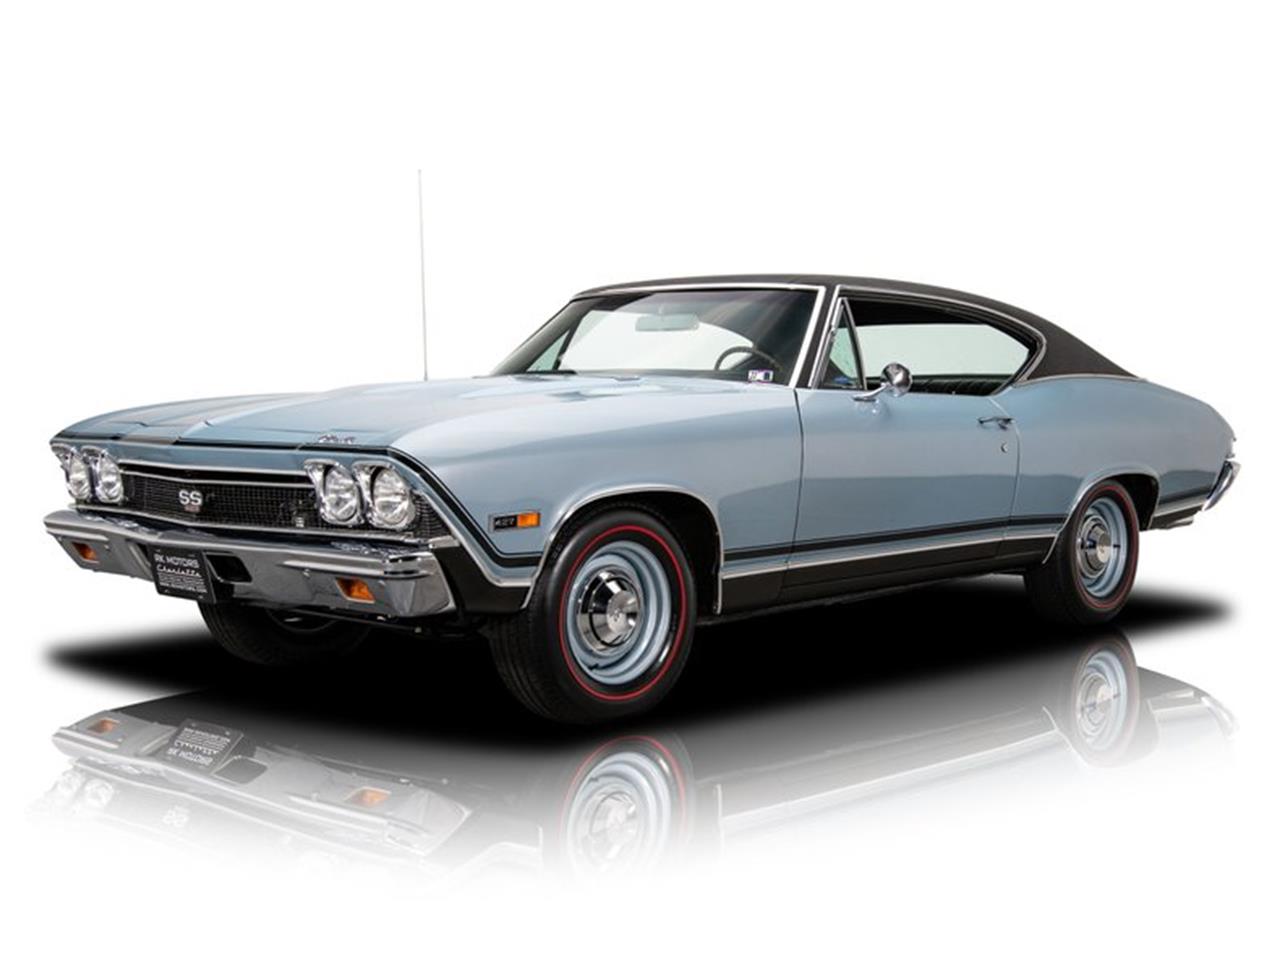 For Sale: 1968 Chevrolet Chevelle in Charlotte, North Carolina for sale in Charlotte, NC